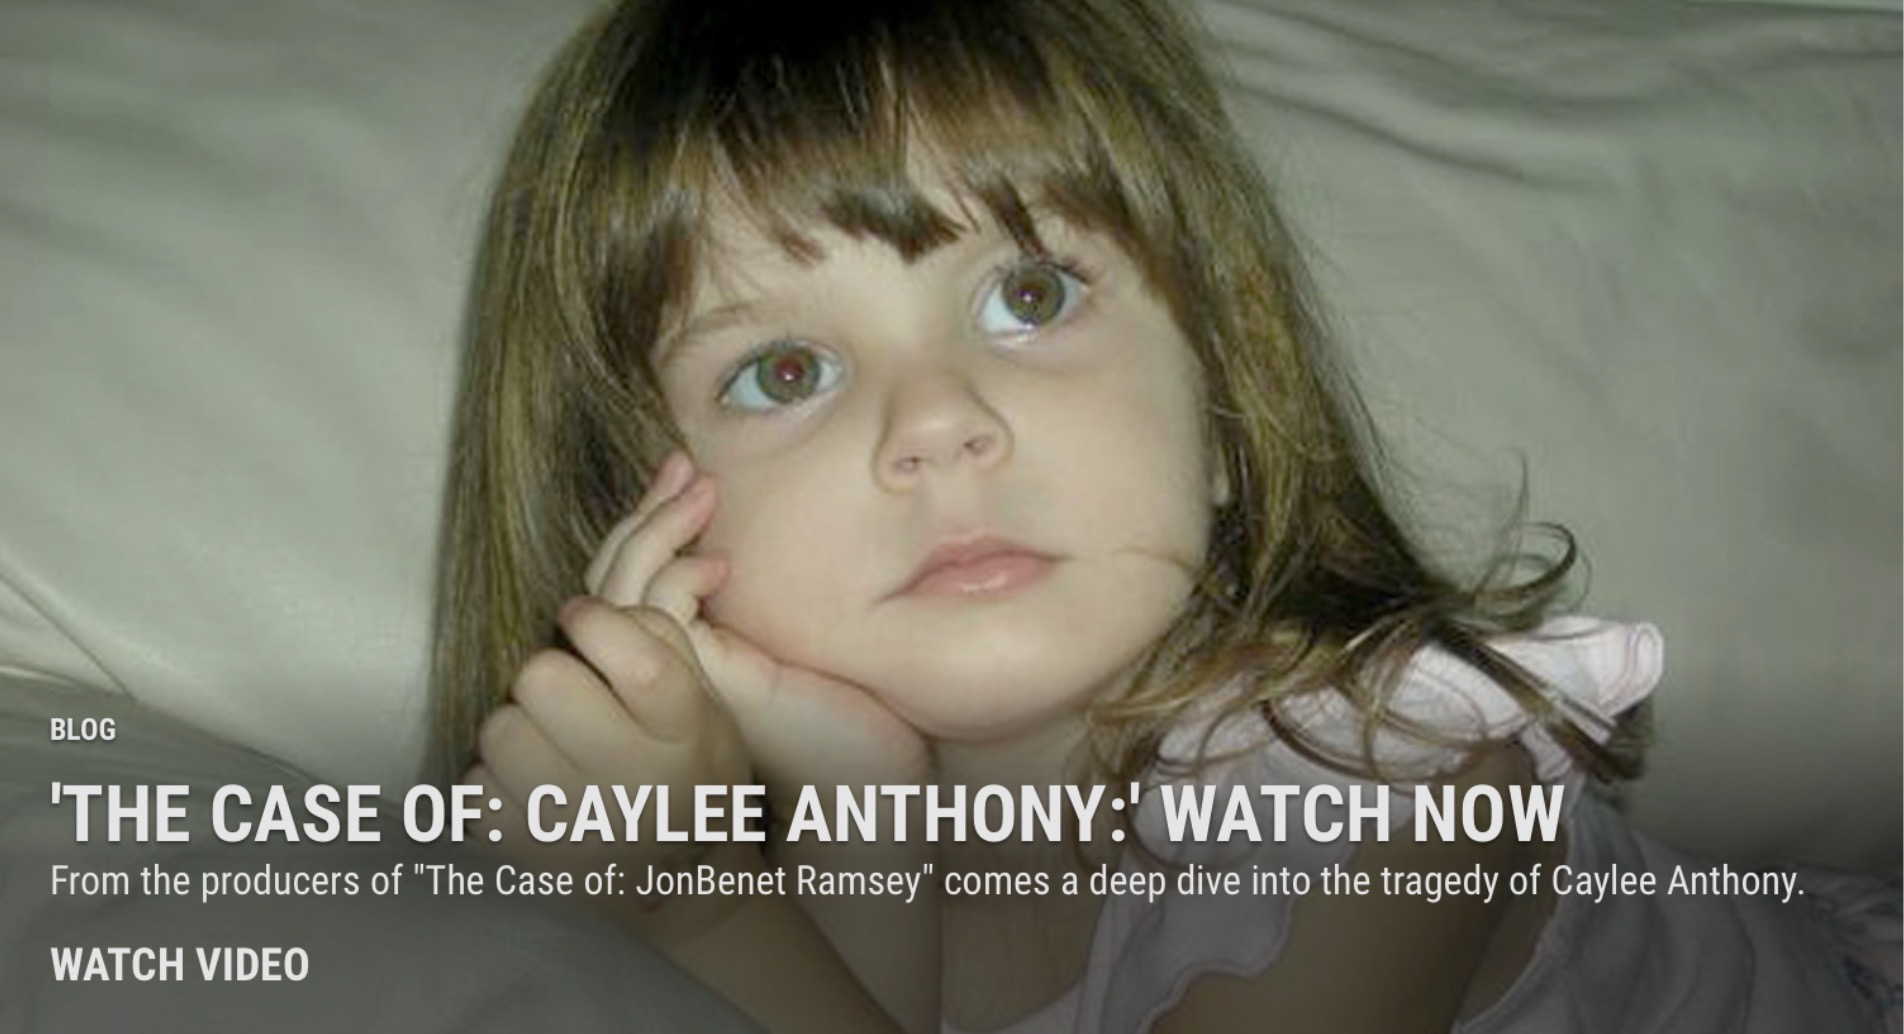 The Case of Caylee Anthony